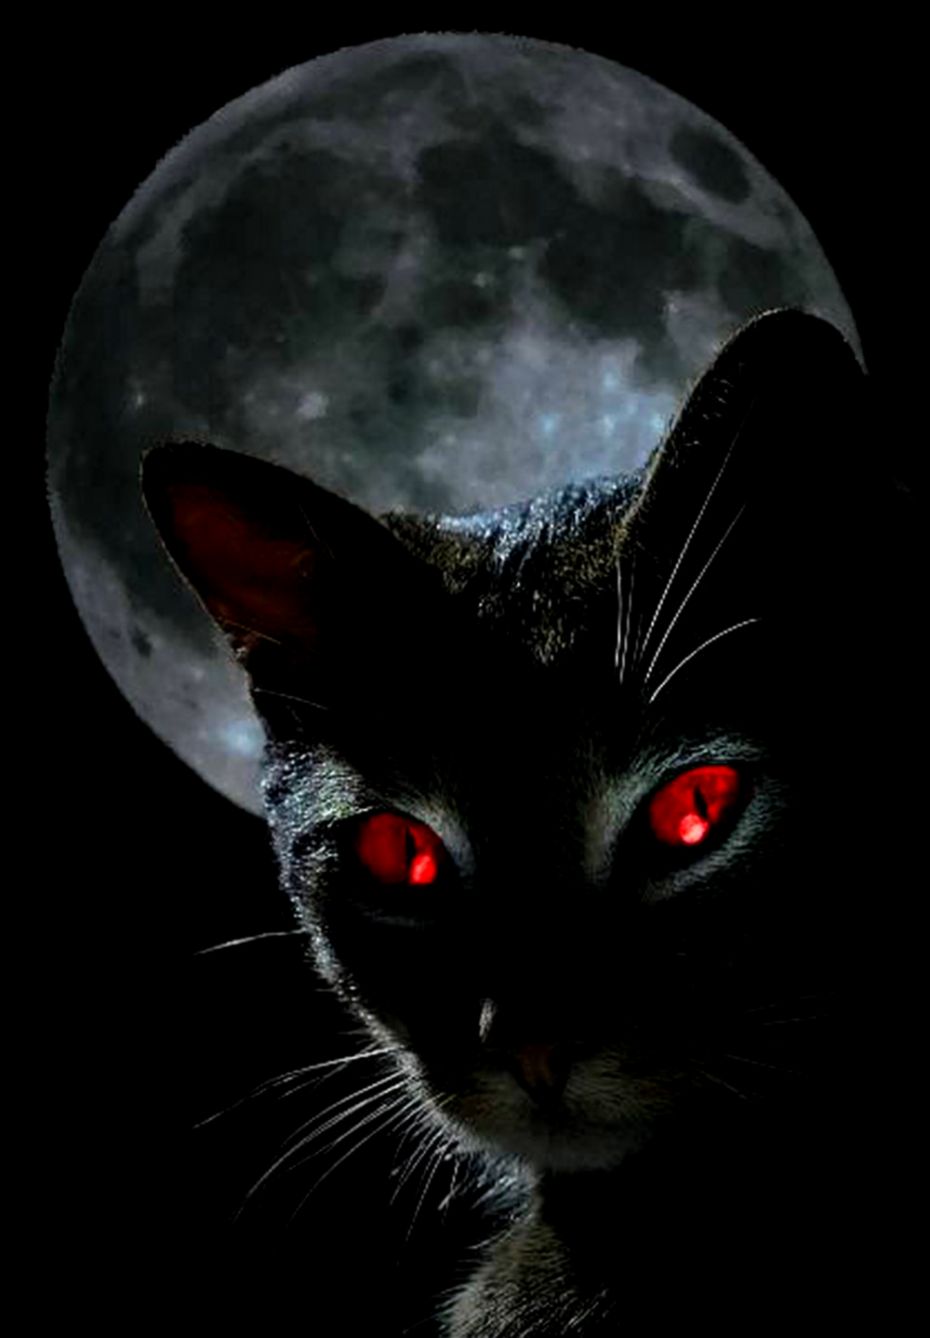 Black Cat Red Eyes Hd Wallpaper | High Definitions Wallpapers